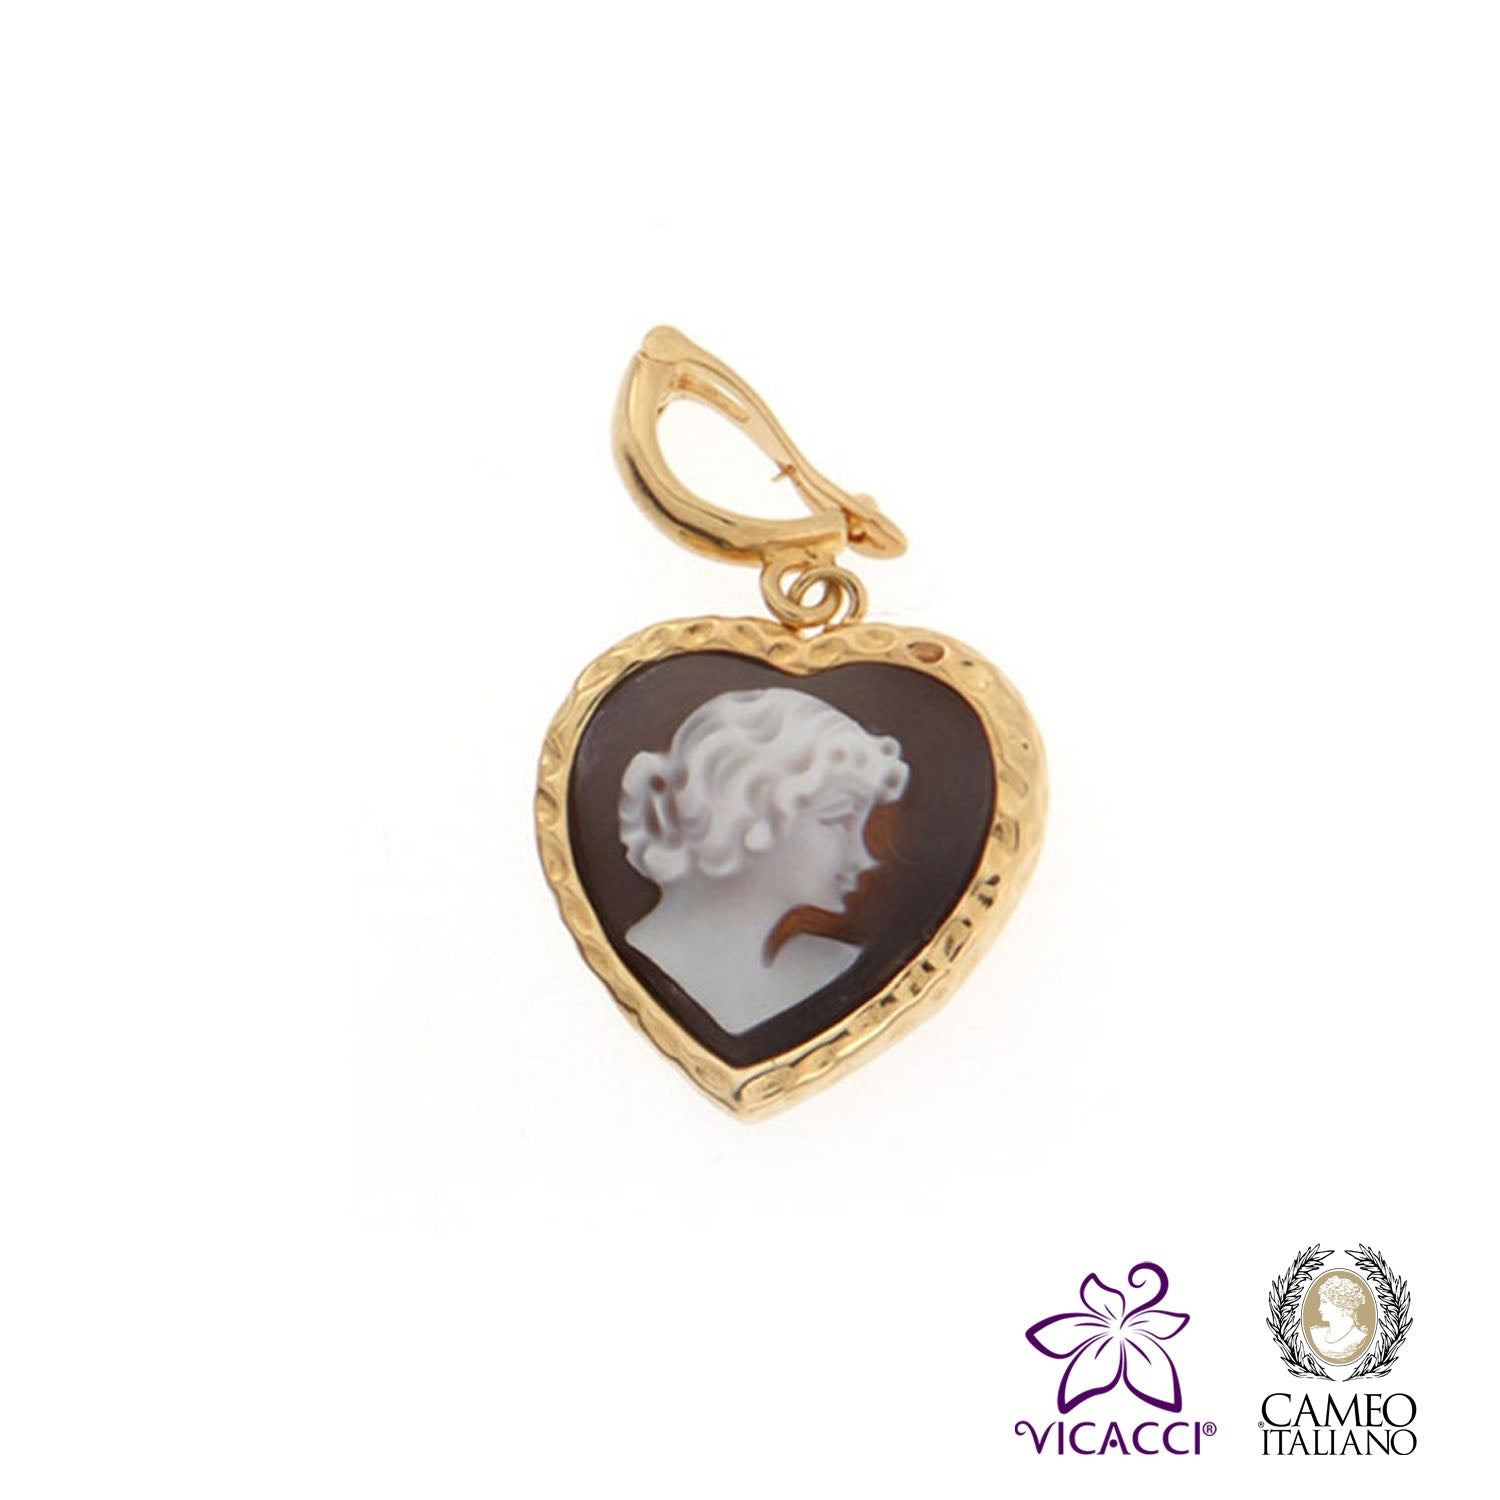 Cameo Italiano, P20 Heart Pendant, Gold Plated Sterling Silver